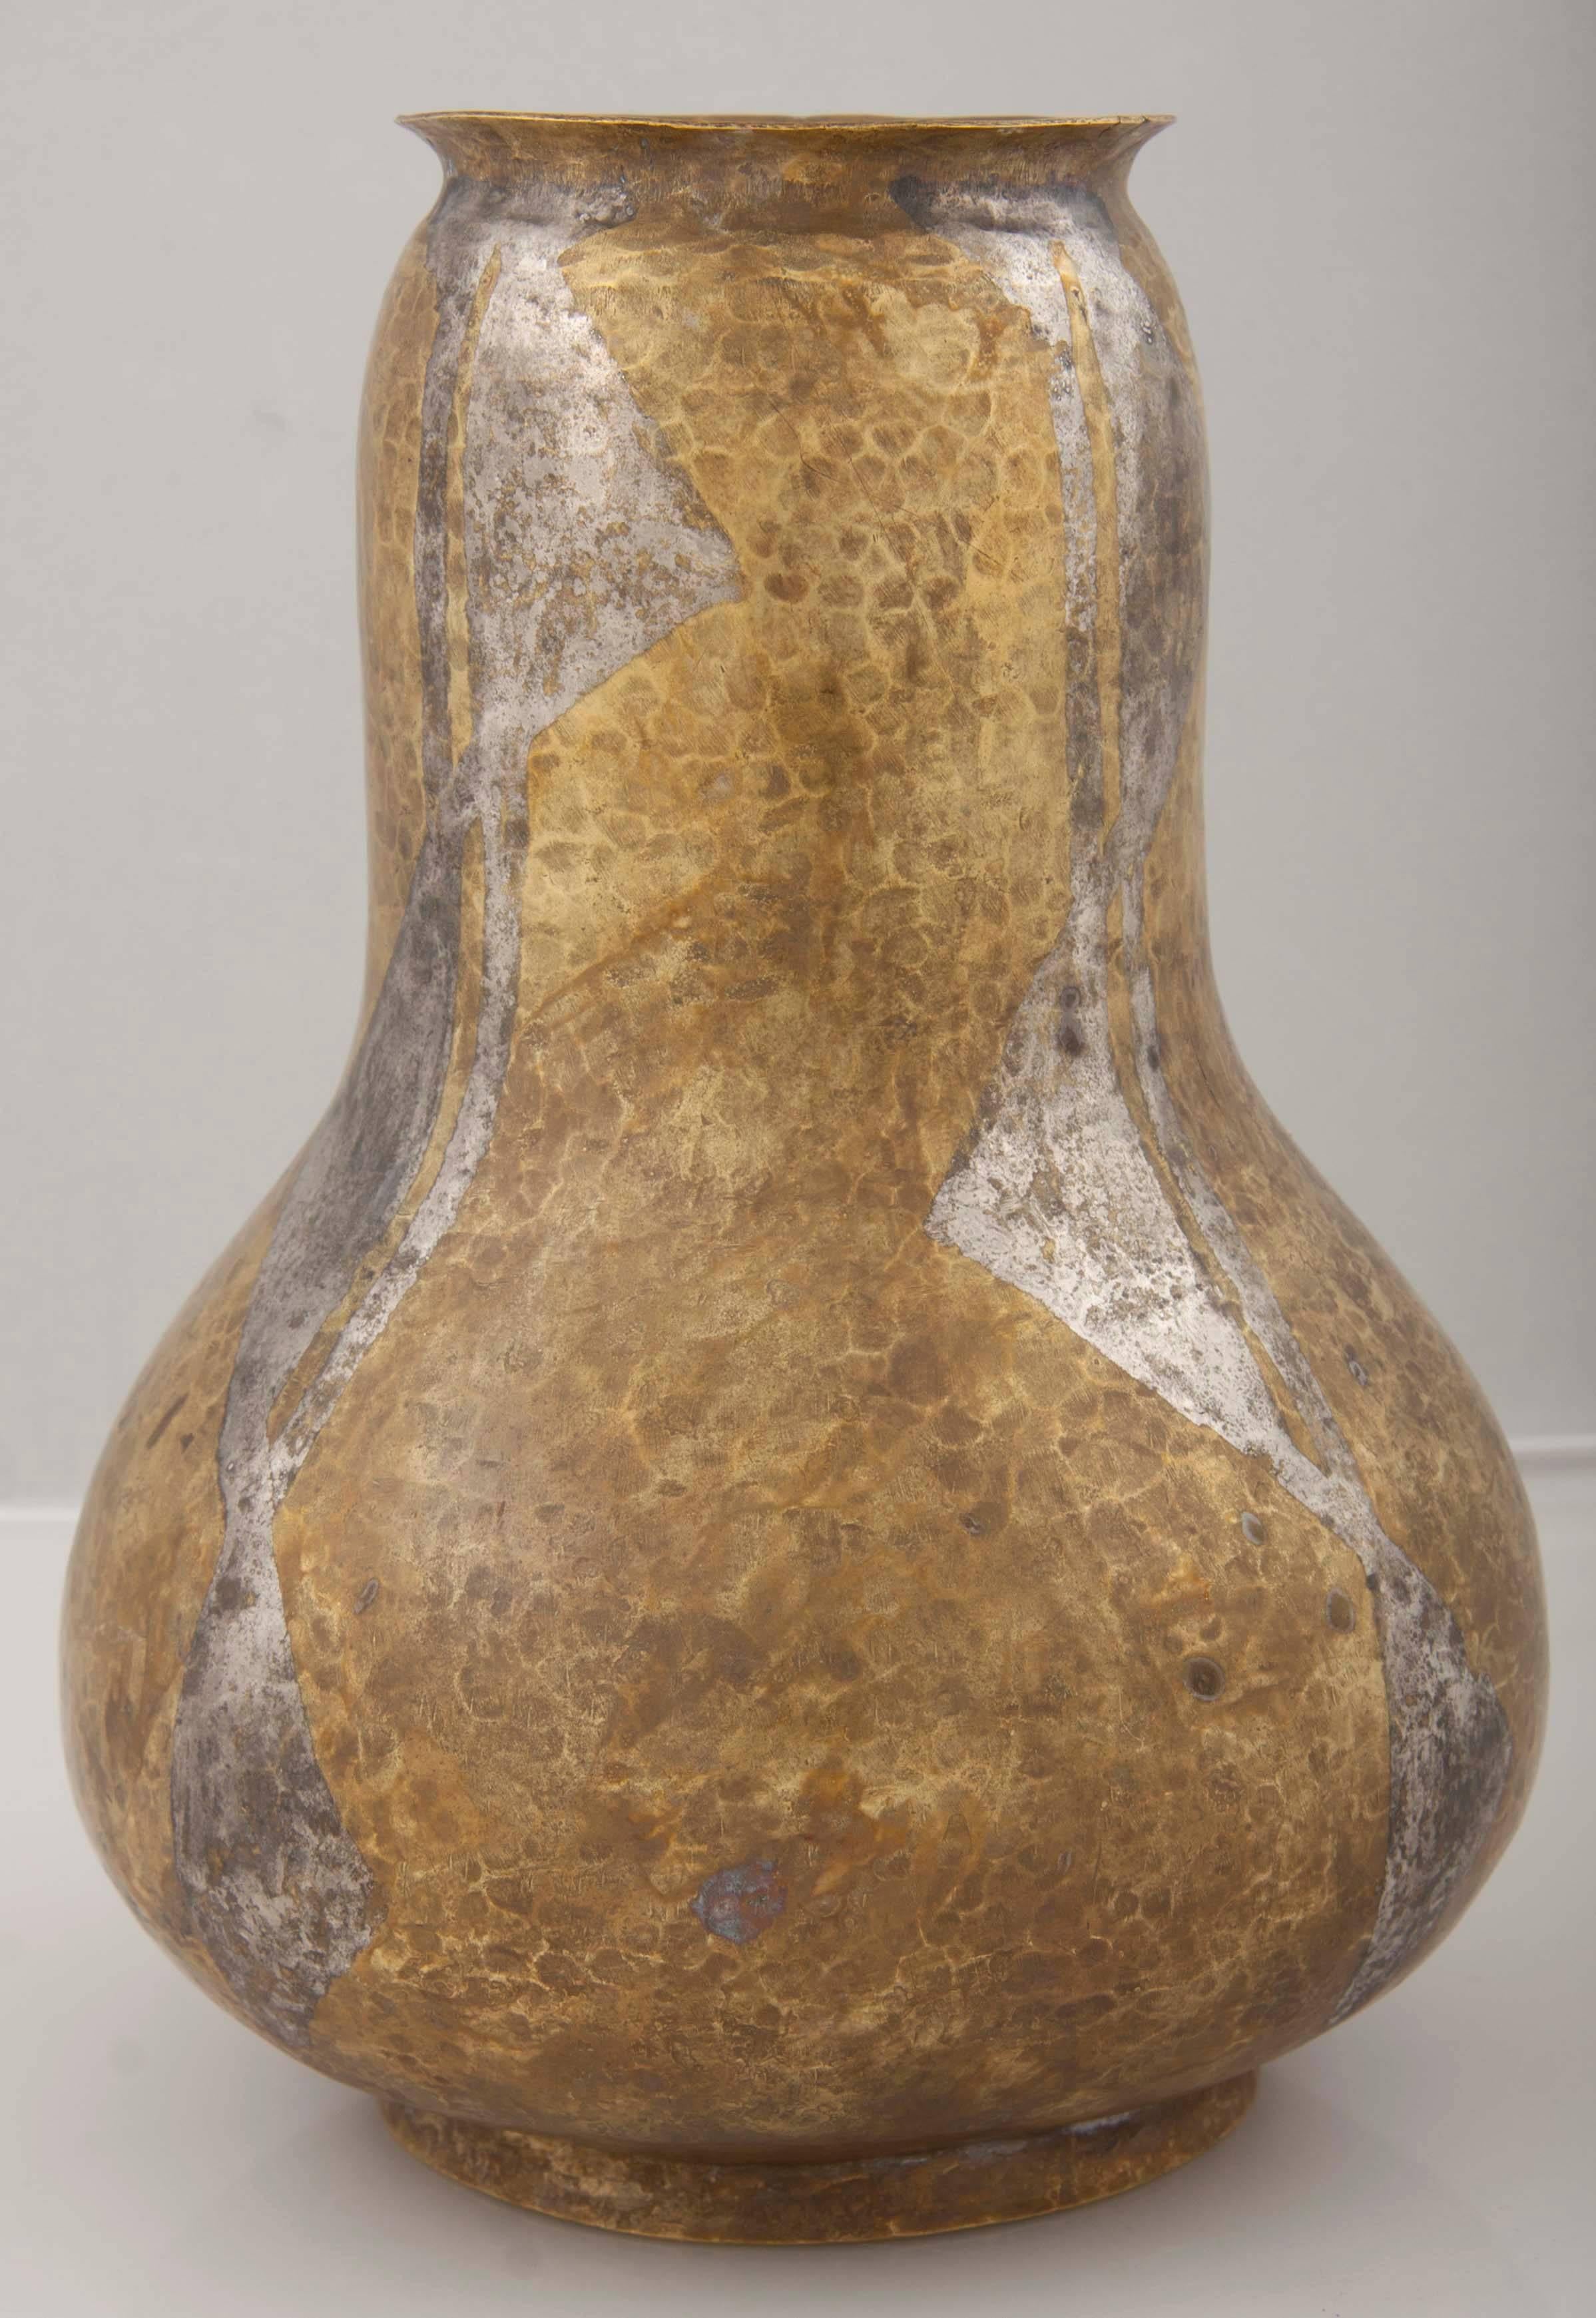 A beautifully patinated brass Dinanderie hammered vase. Made in France by Loys. Marked on underside.